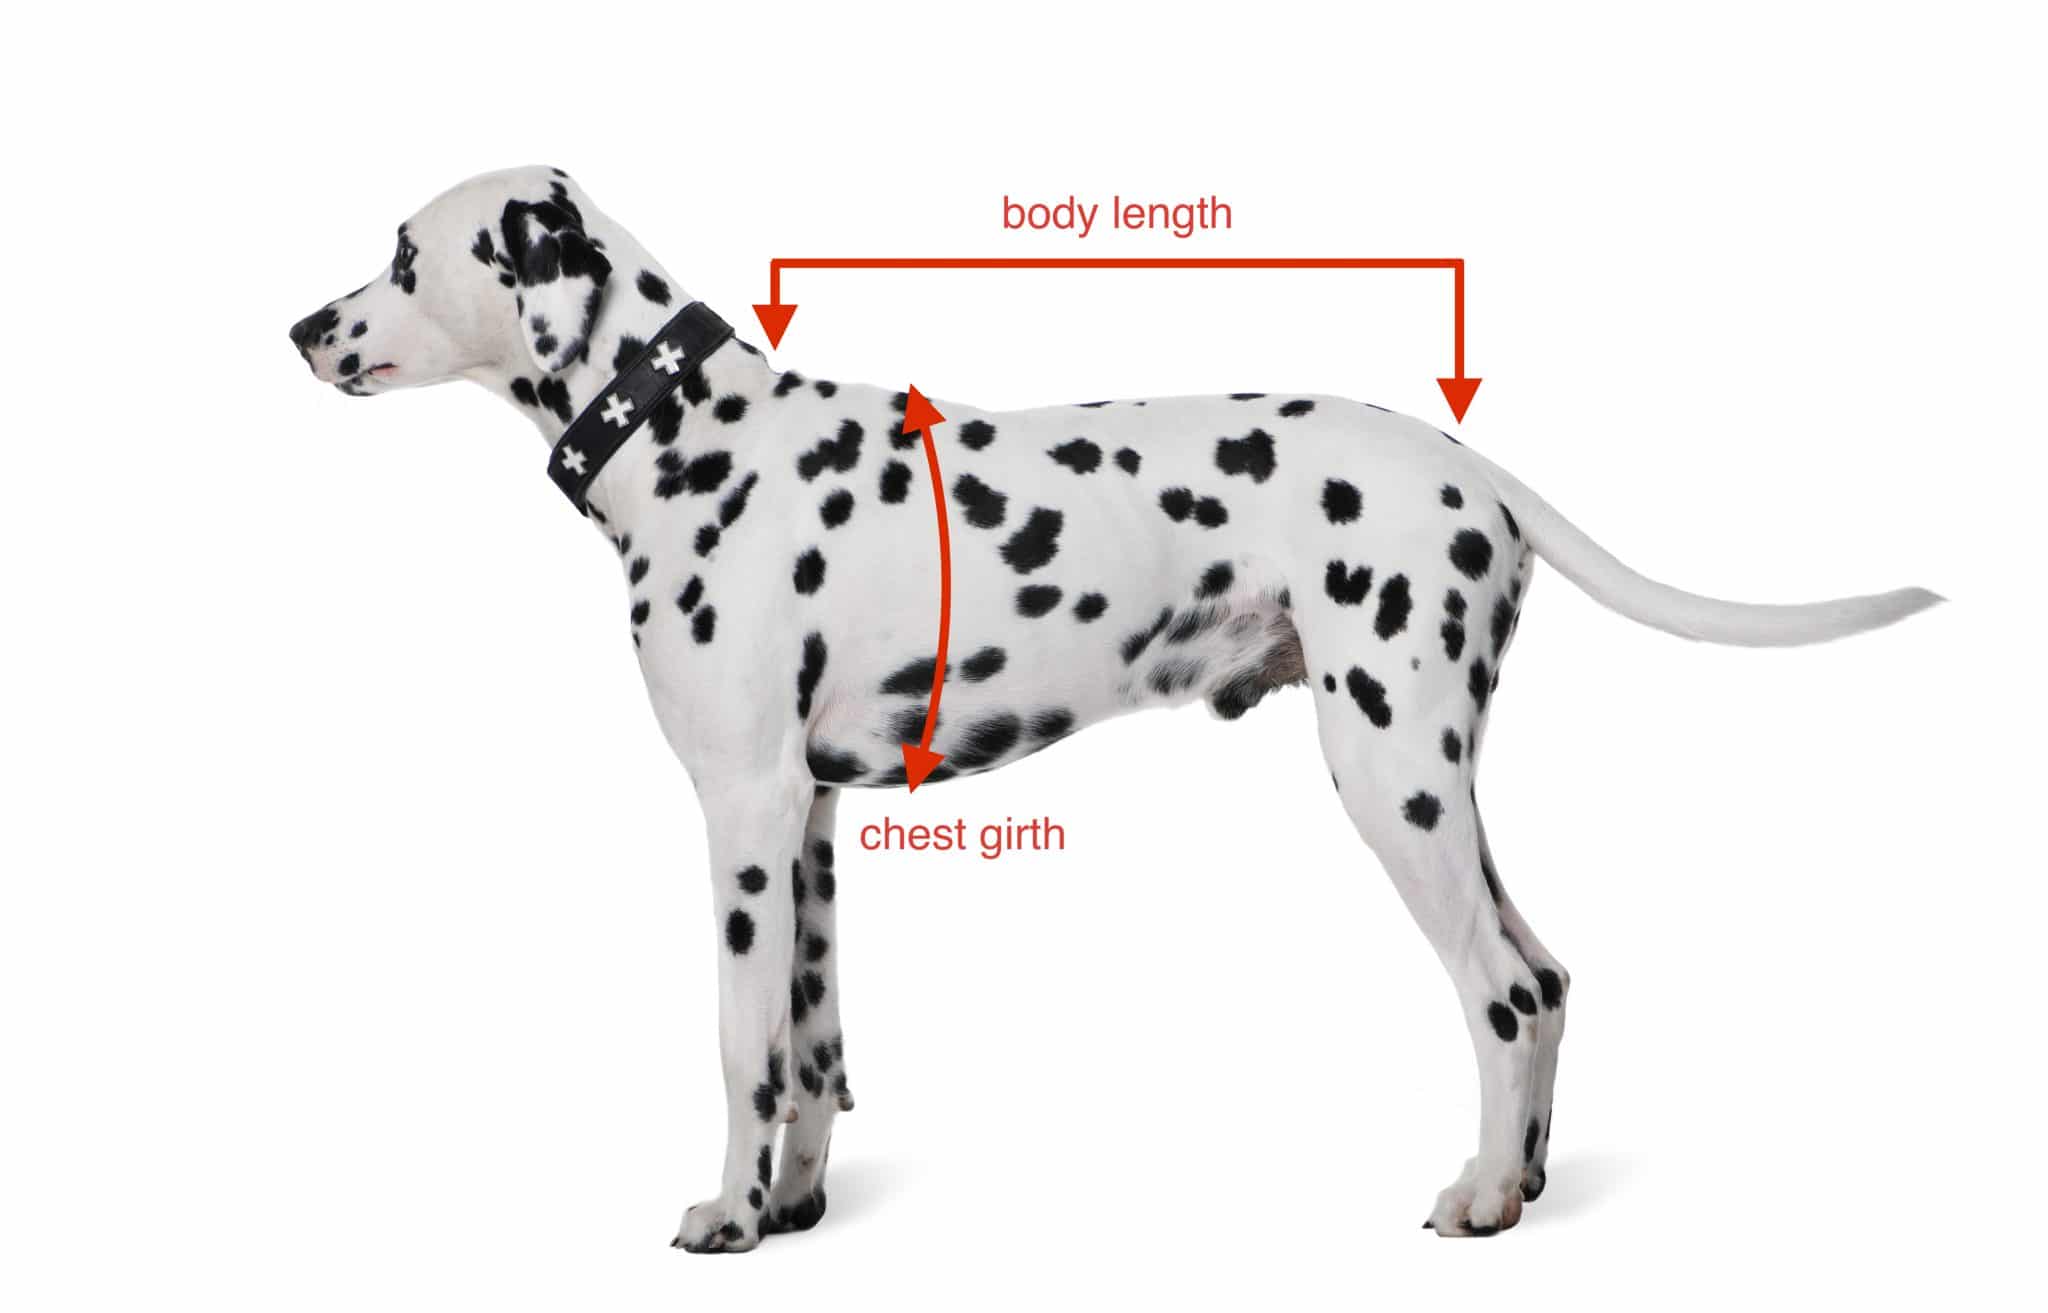 Dalmatian standing in profile with lines indicating body length and chest girth